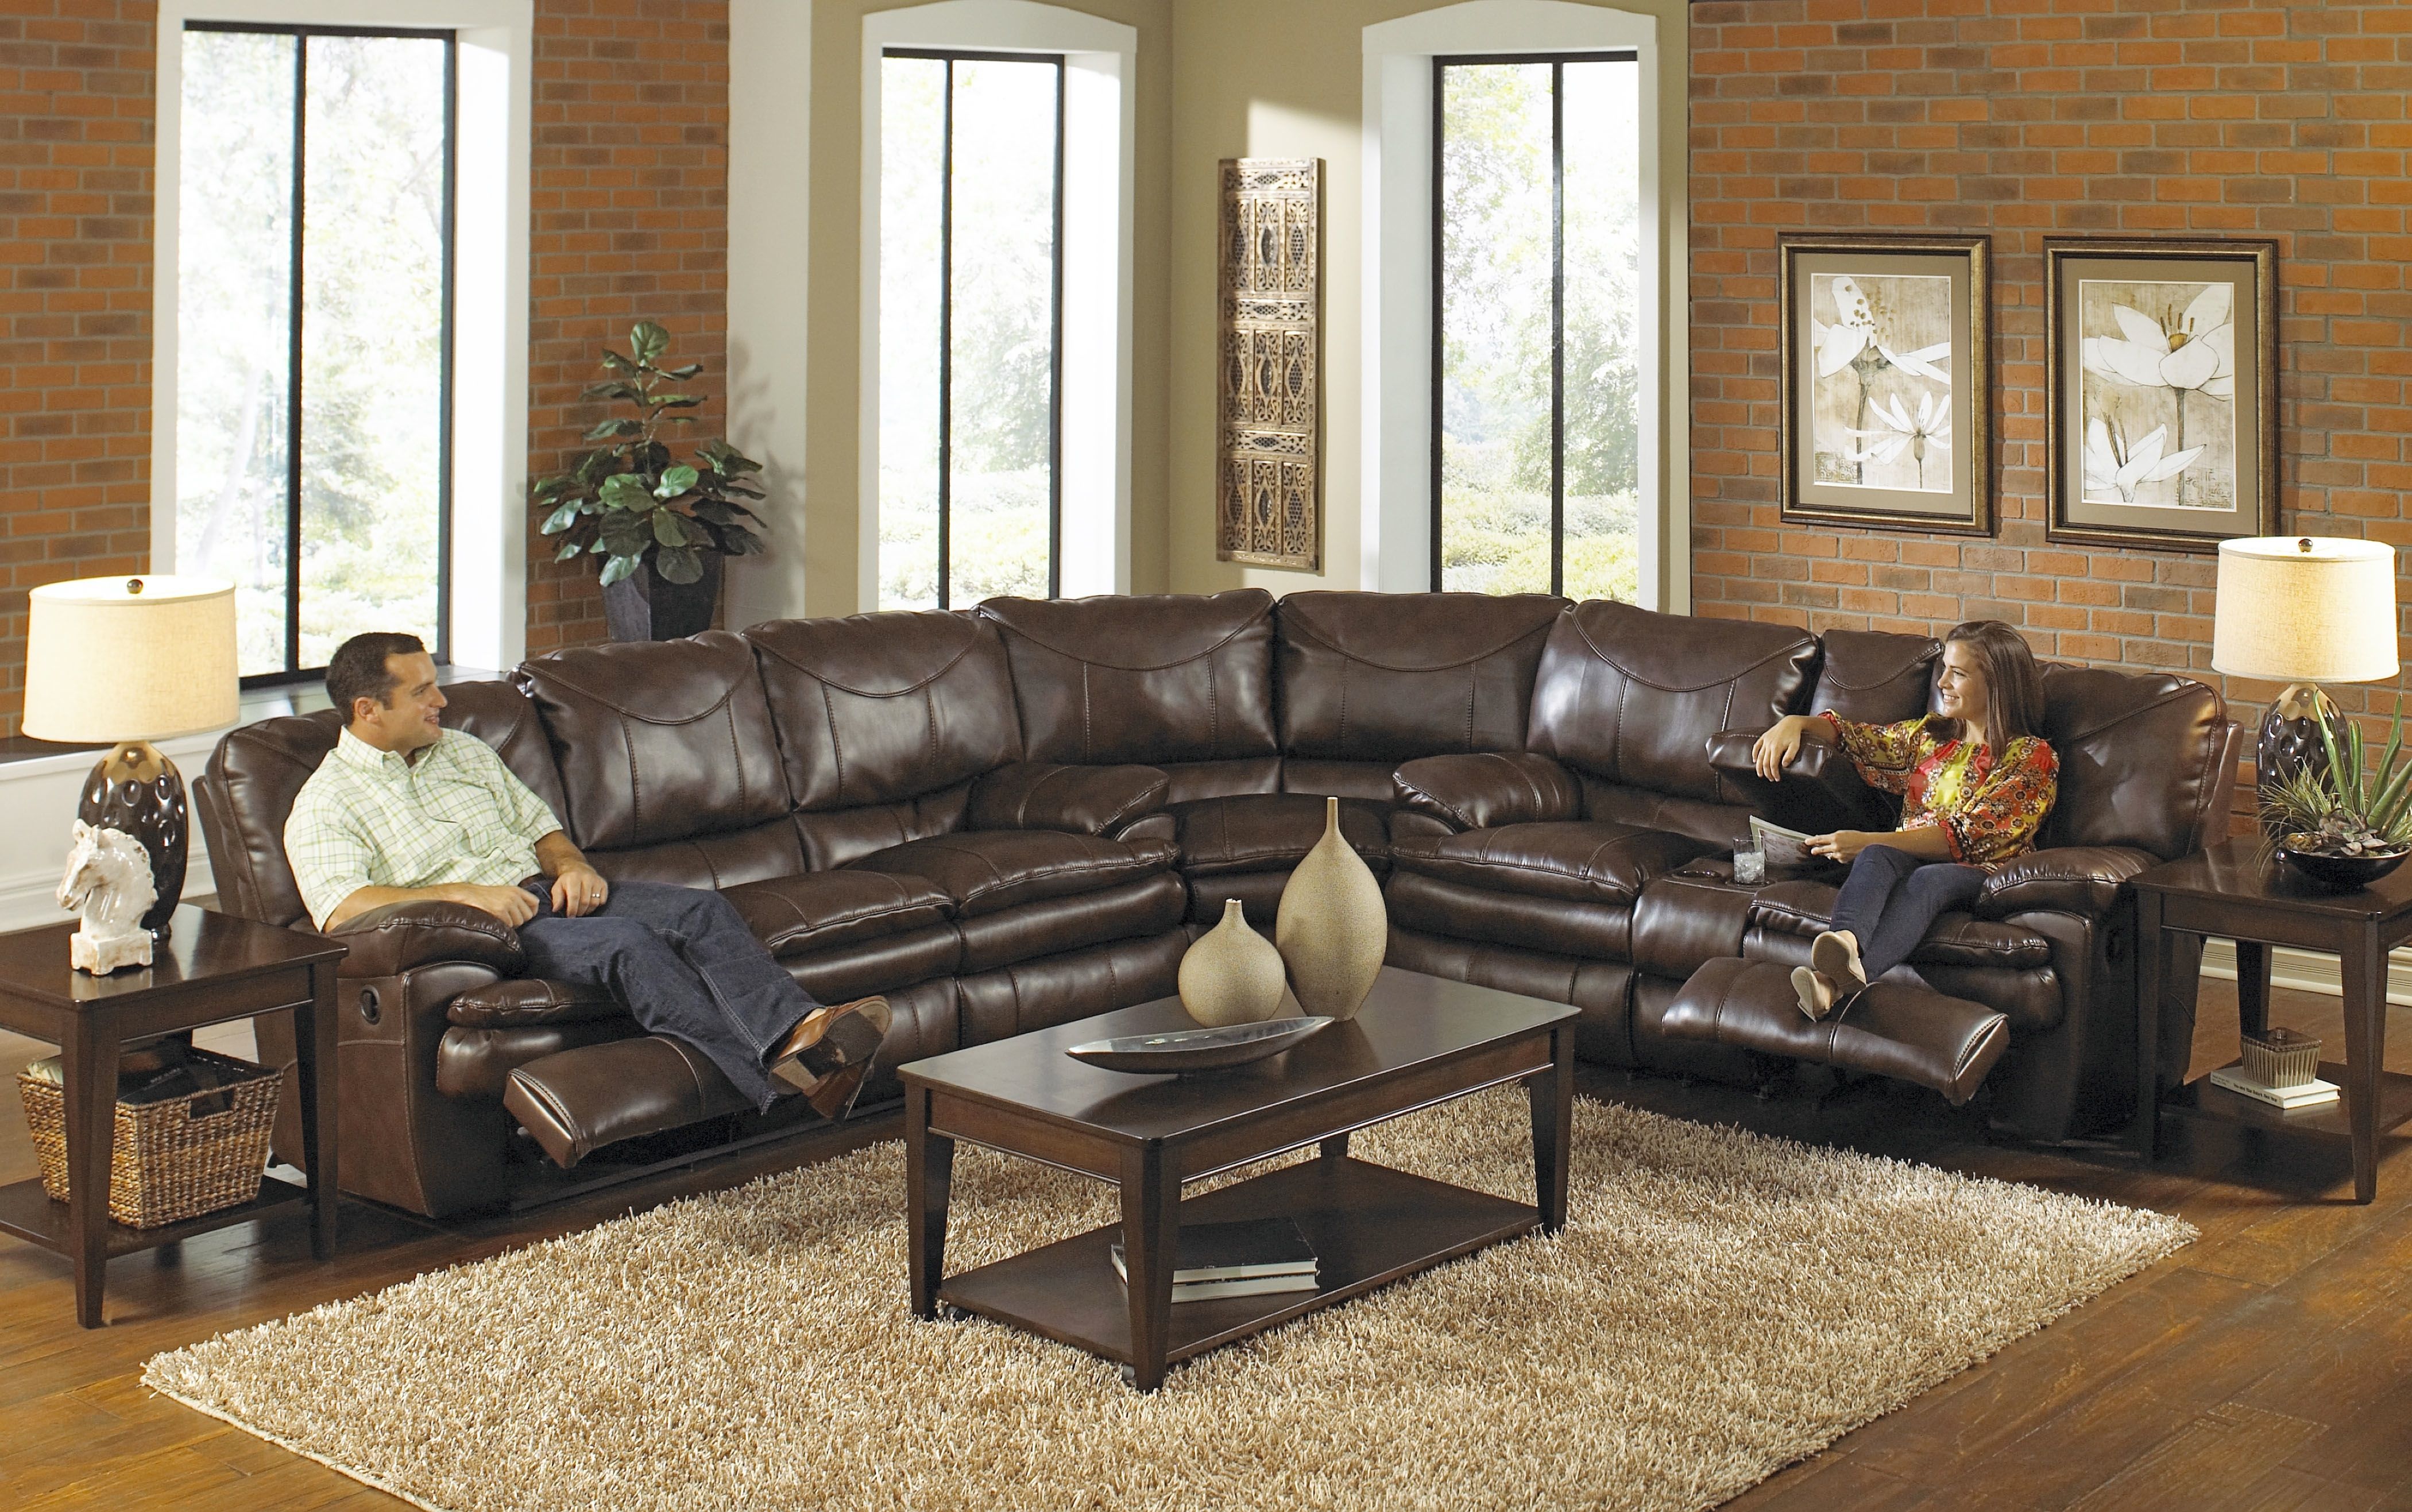 Epic High Quality Sectional Sofa 21 With Additional Modern Sofa Regarding High Quality Sectional Sofas (View 5 of 10)